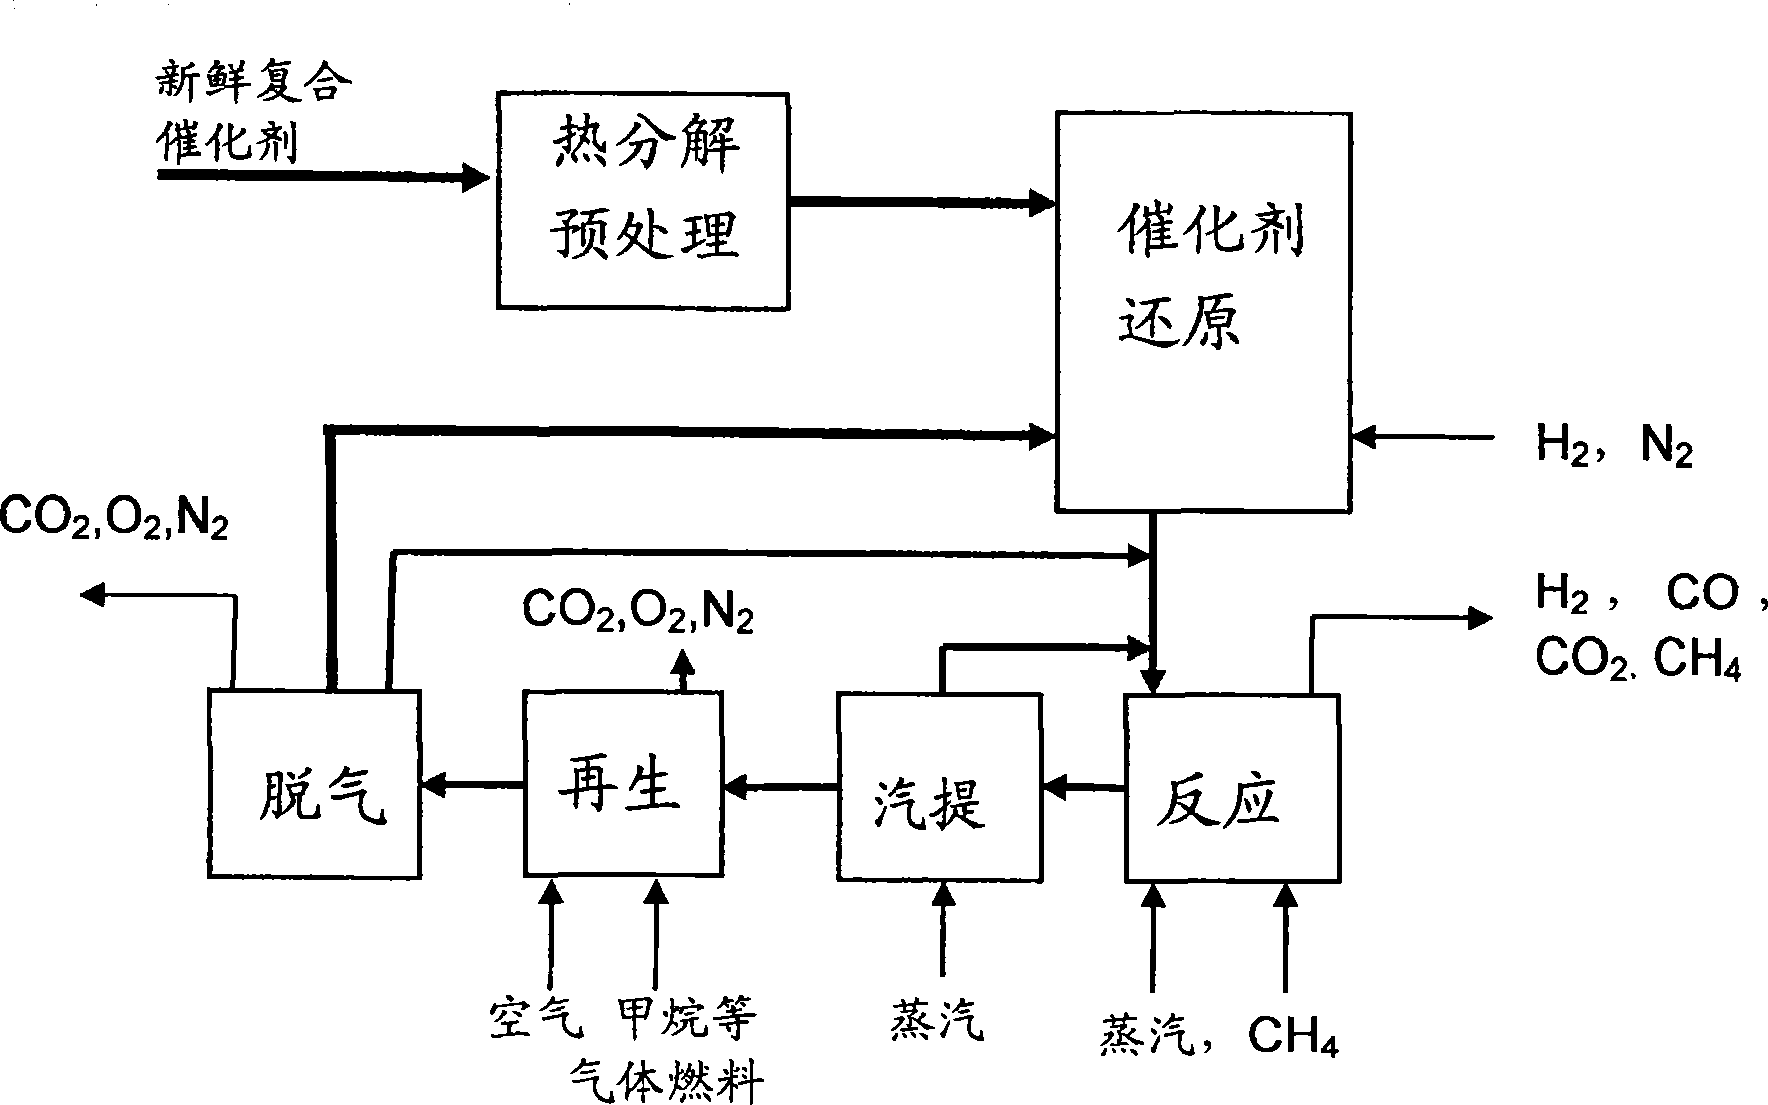 Adsorption reinforced methane steam reforming hydrogen production process and apparatus using circulating fluidized bed